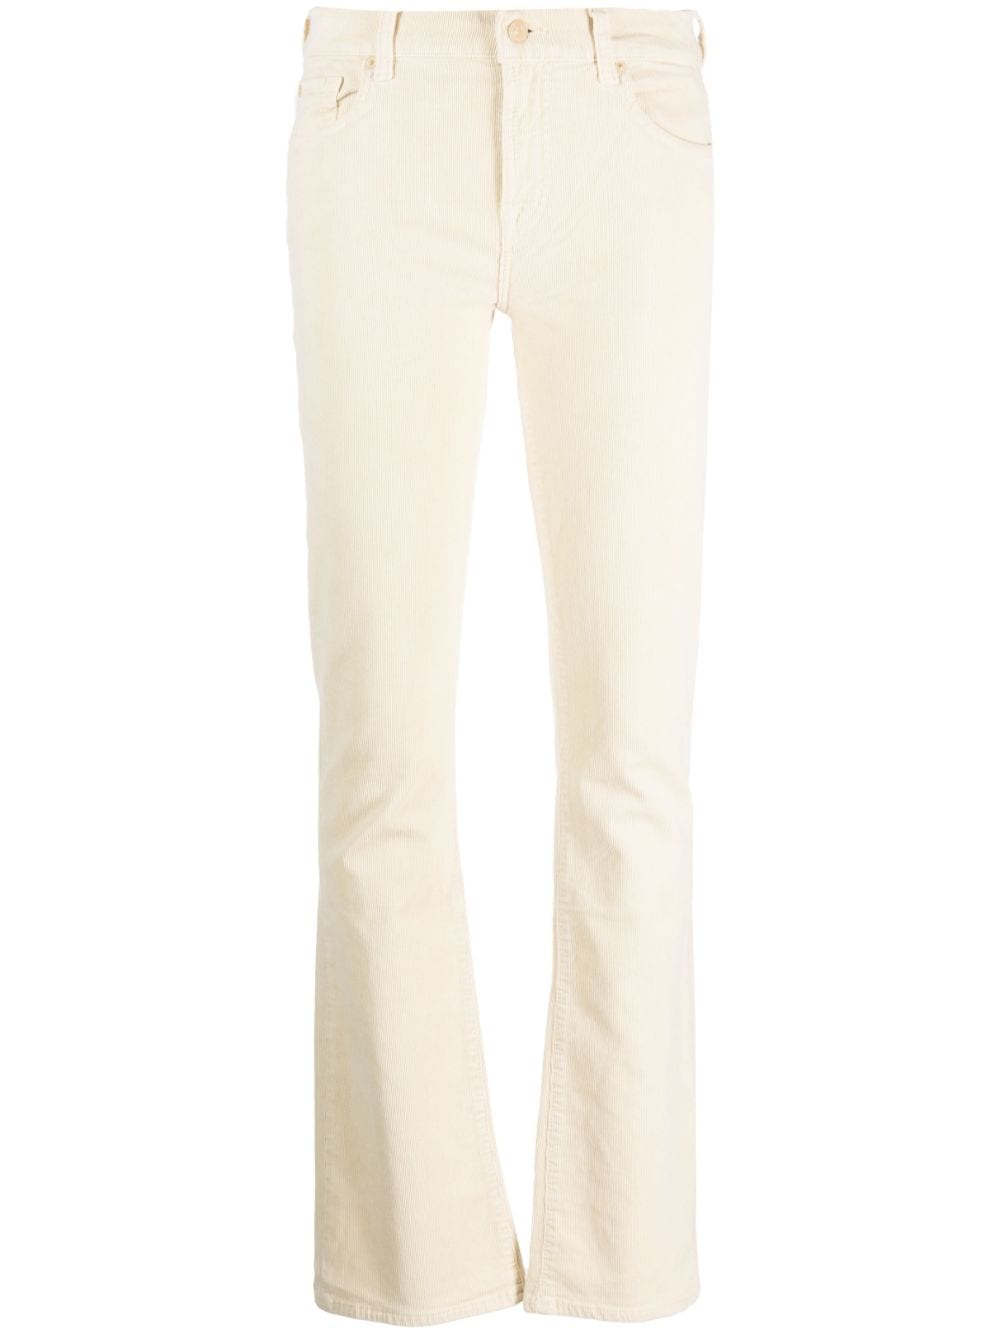 7 For All Mankind corduroy bootcut jeans - Neutrals von 7 For All Mankind